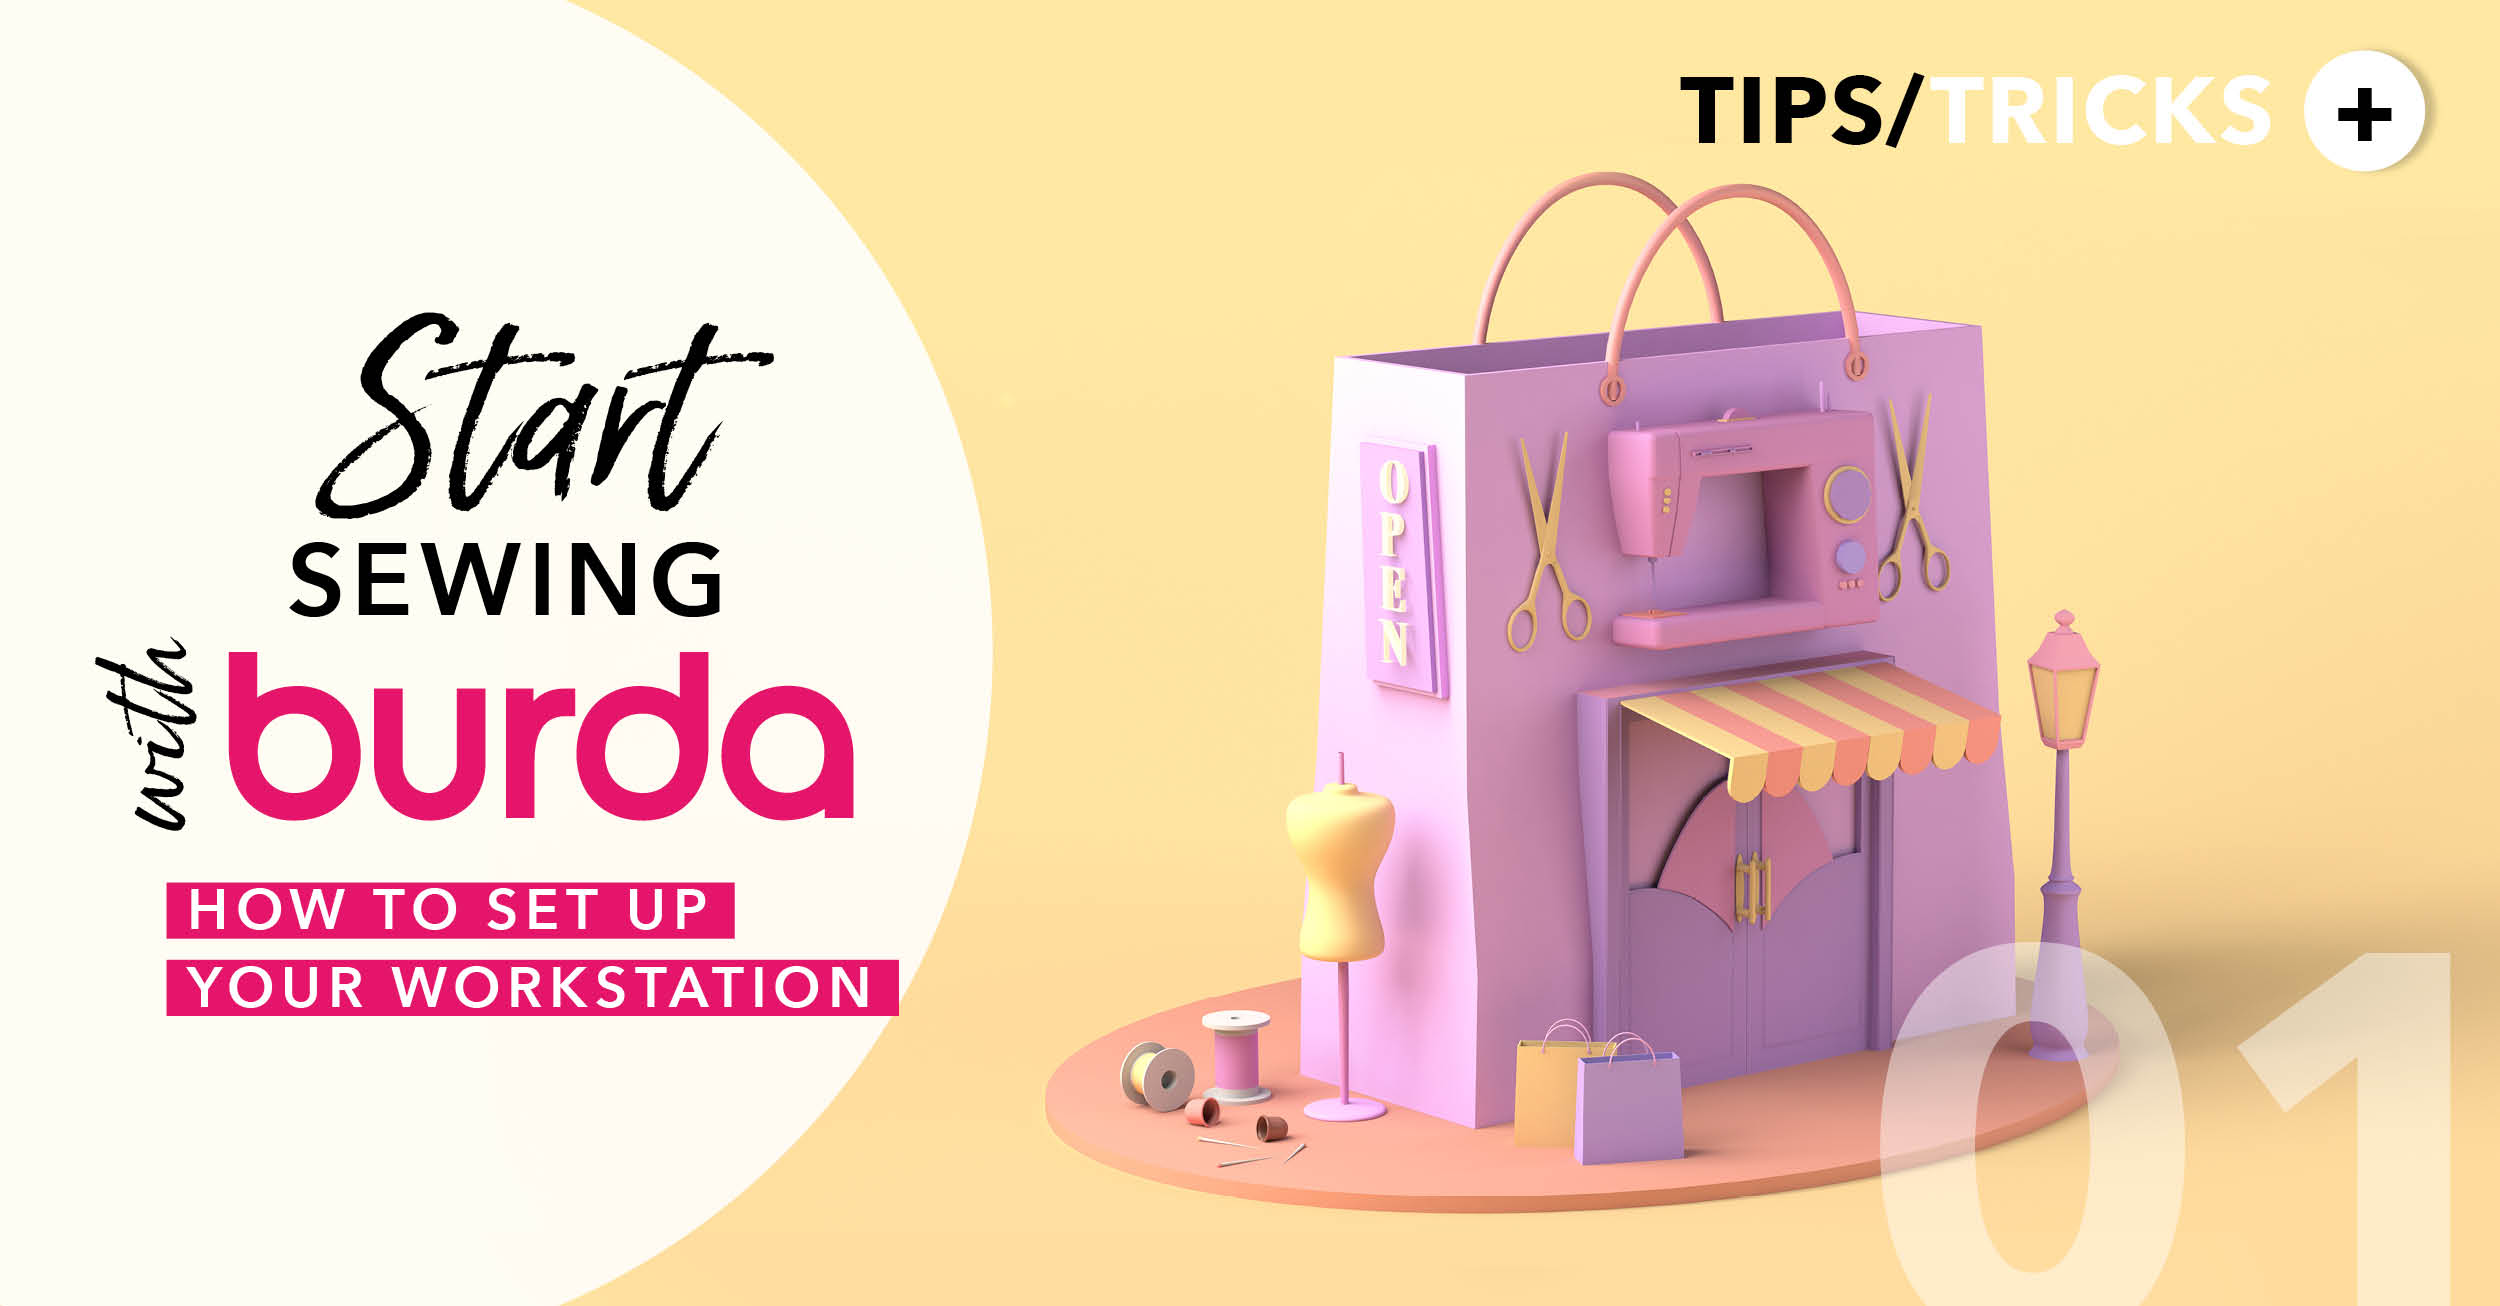 Sewing Techniques With Burda: How to Set Up Your Workstation